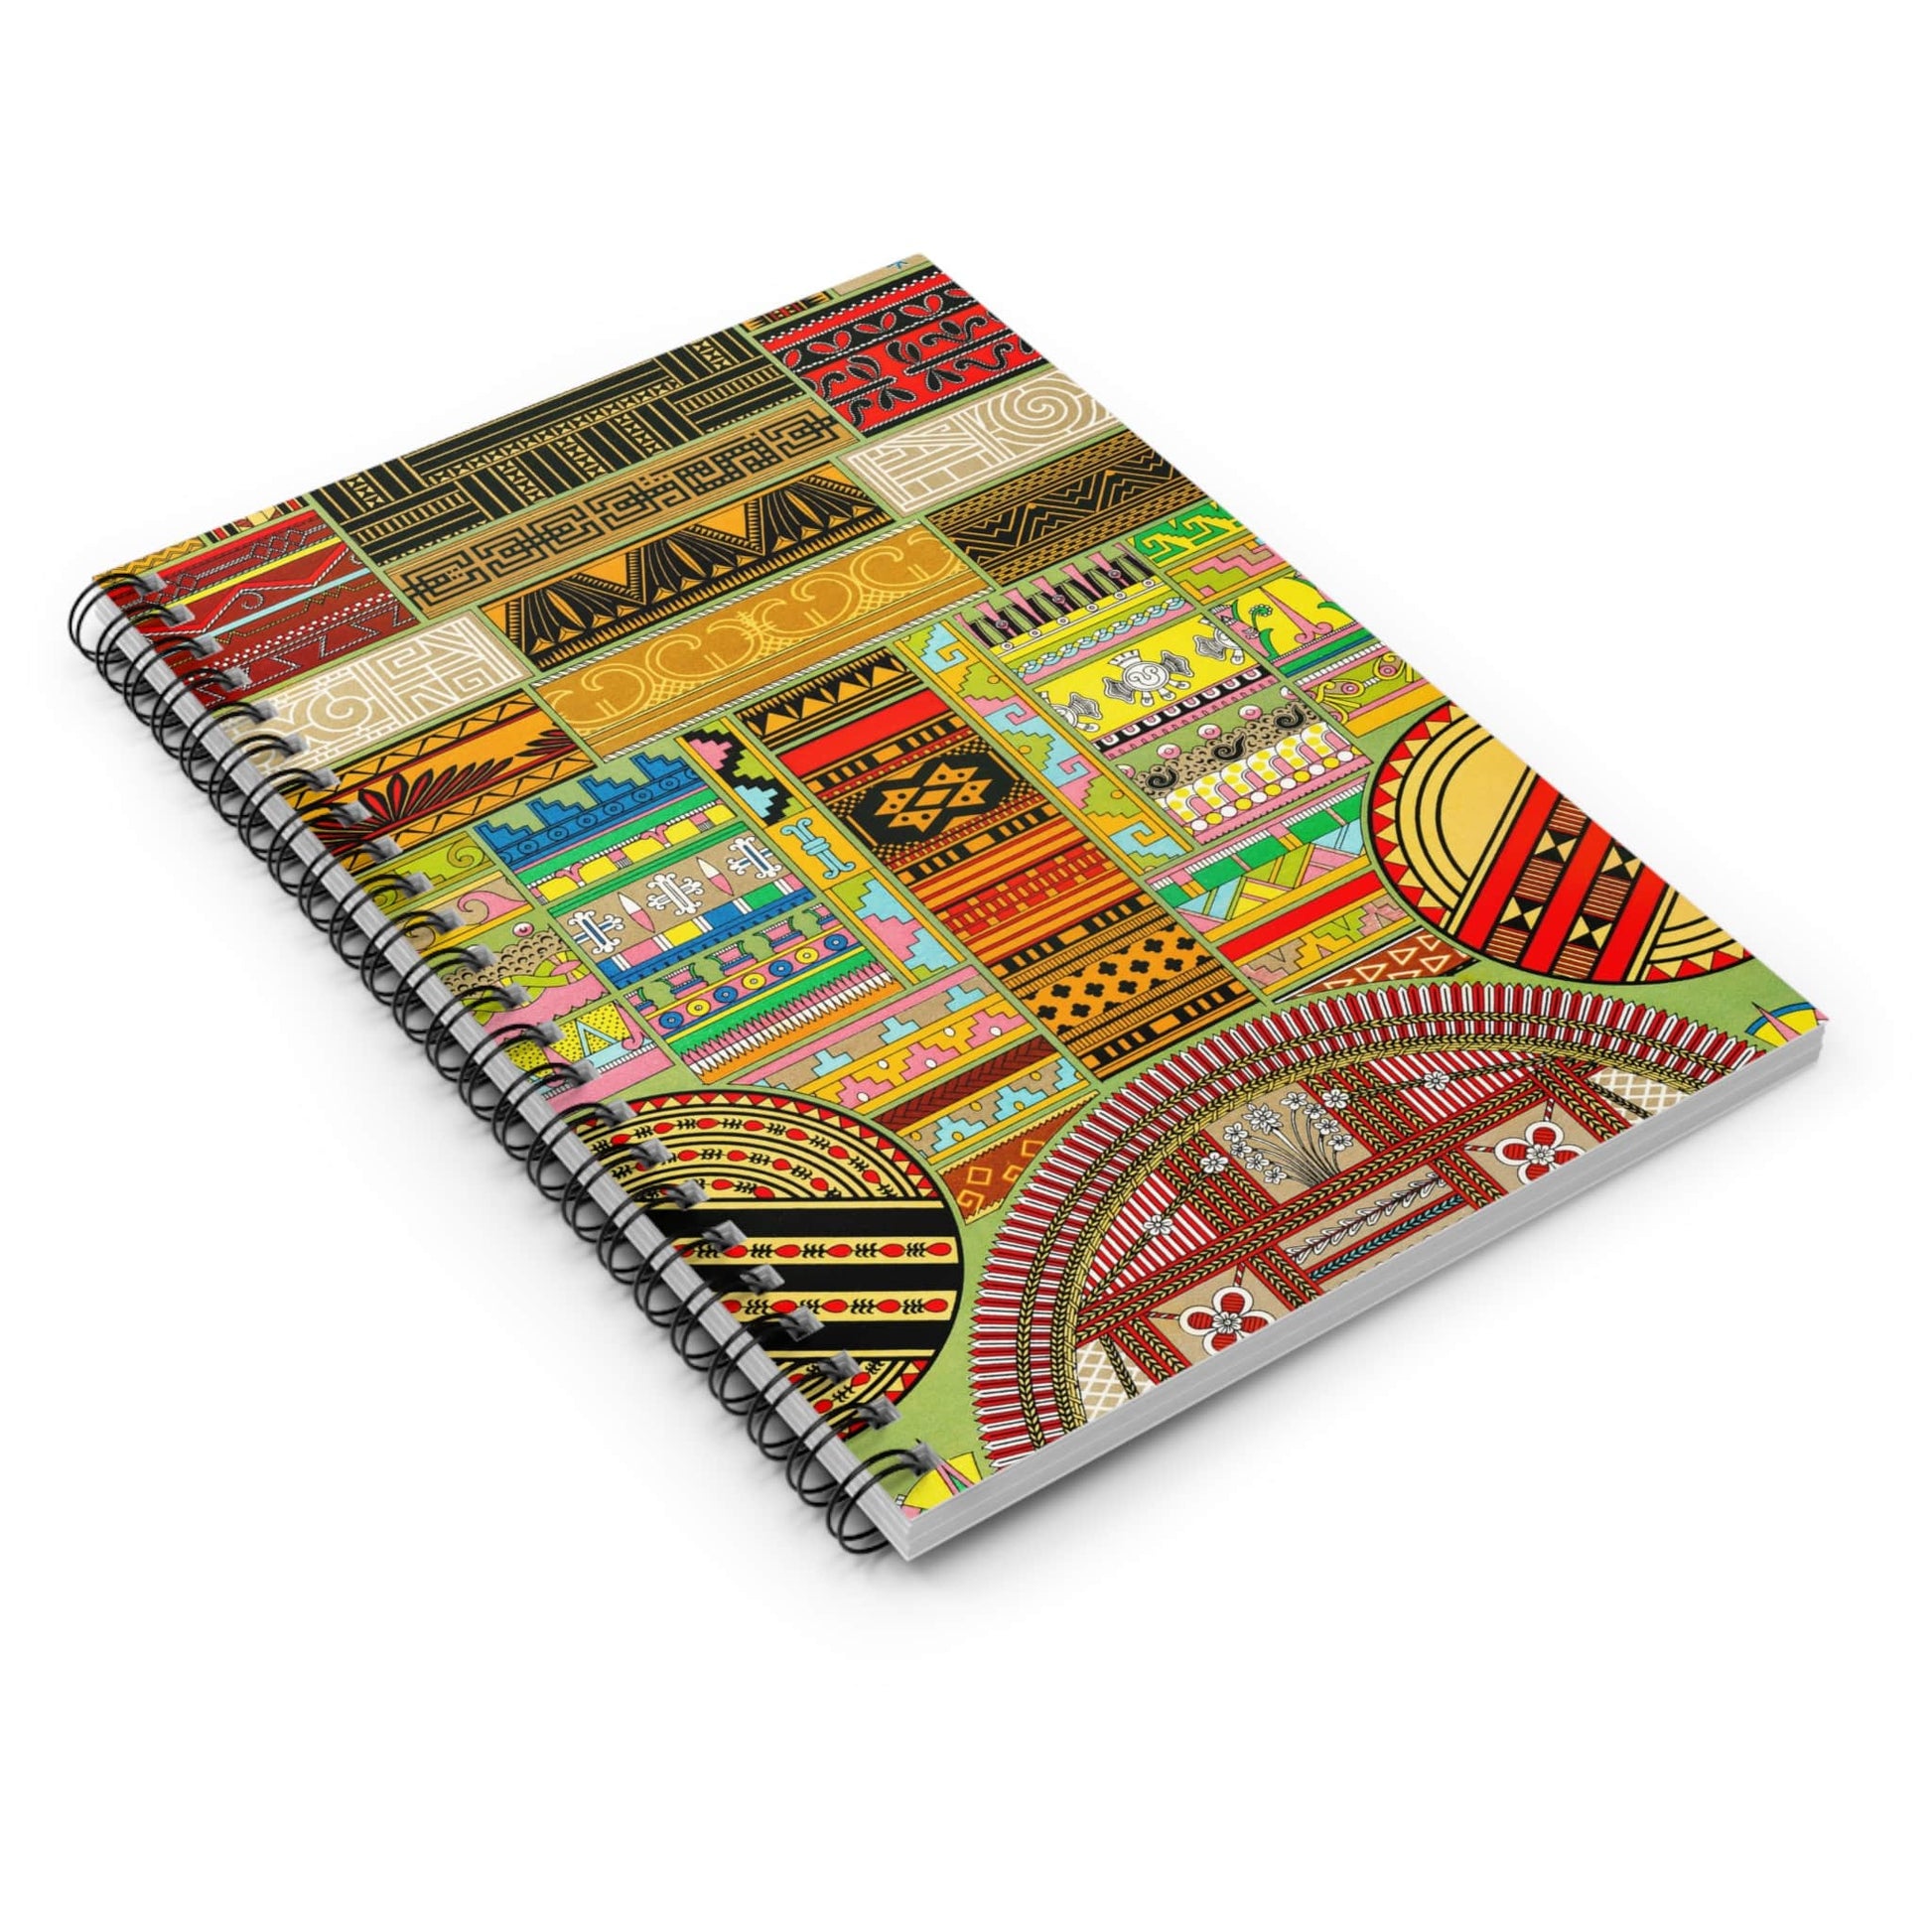 Design Inspiration Spiral Notebook Laying Flat on White Surface